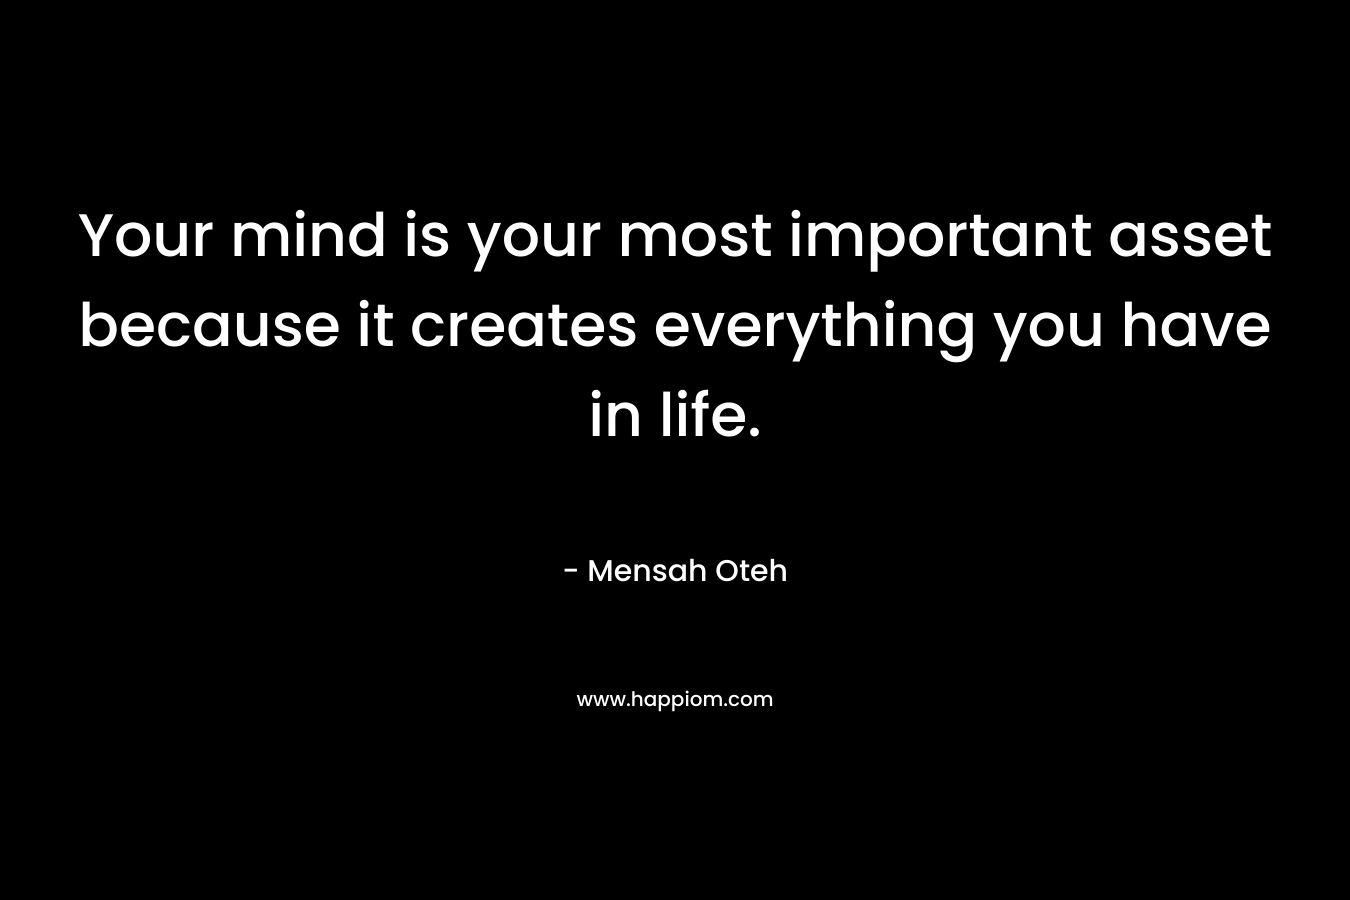 Your mind is your most important asset because it creates everything you have in life.